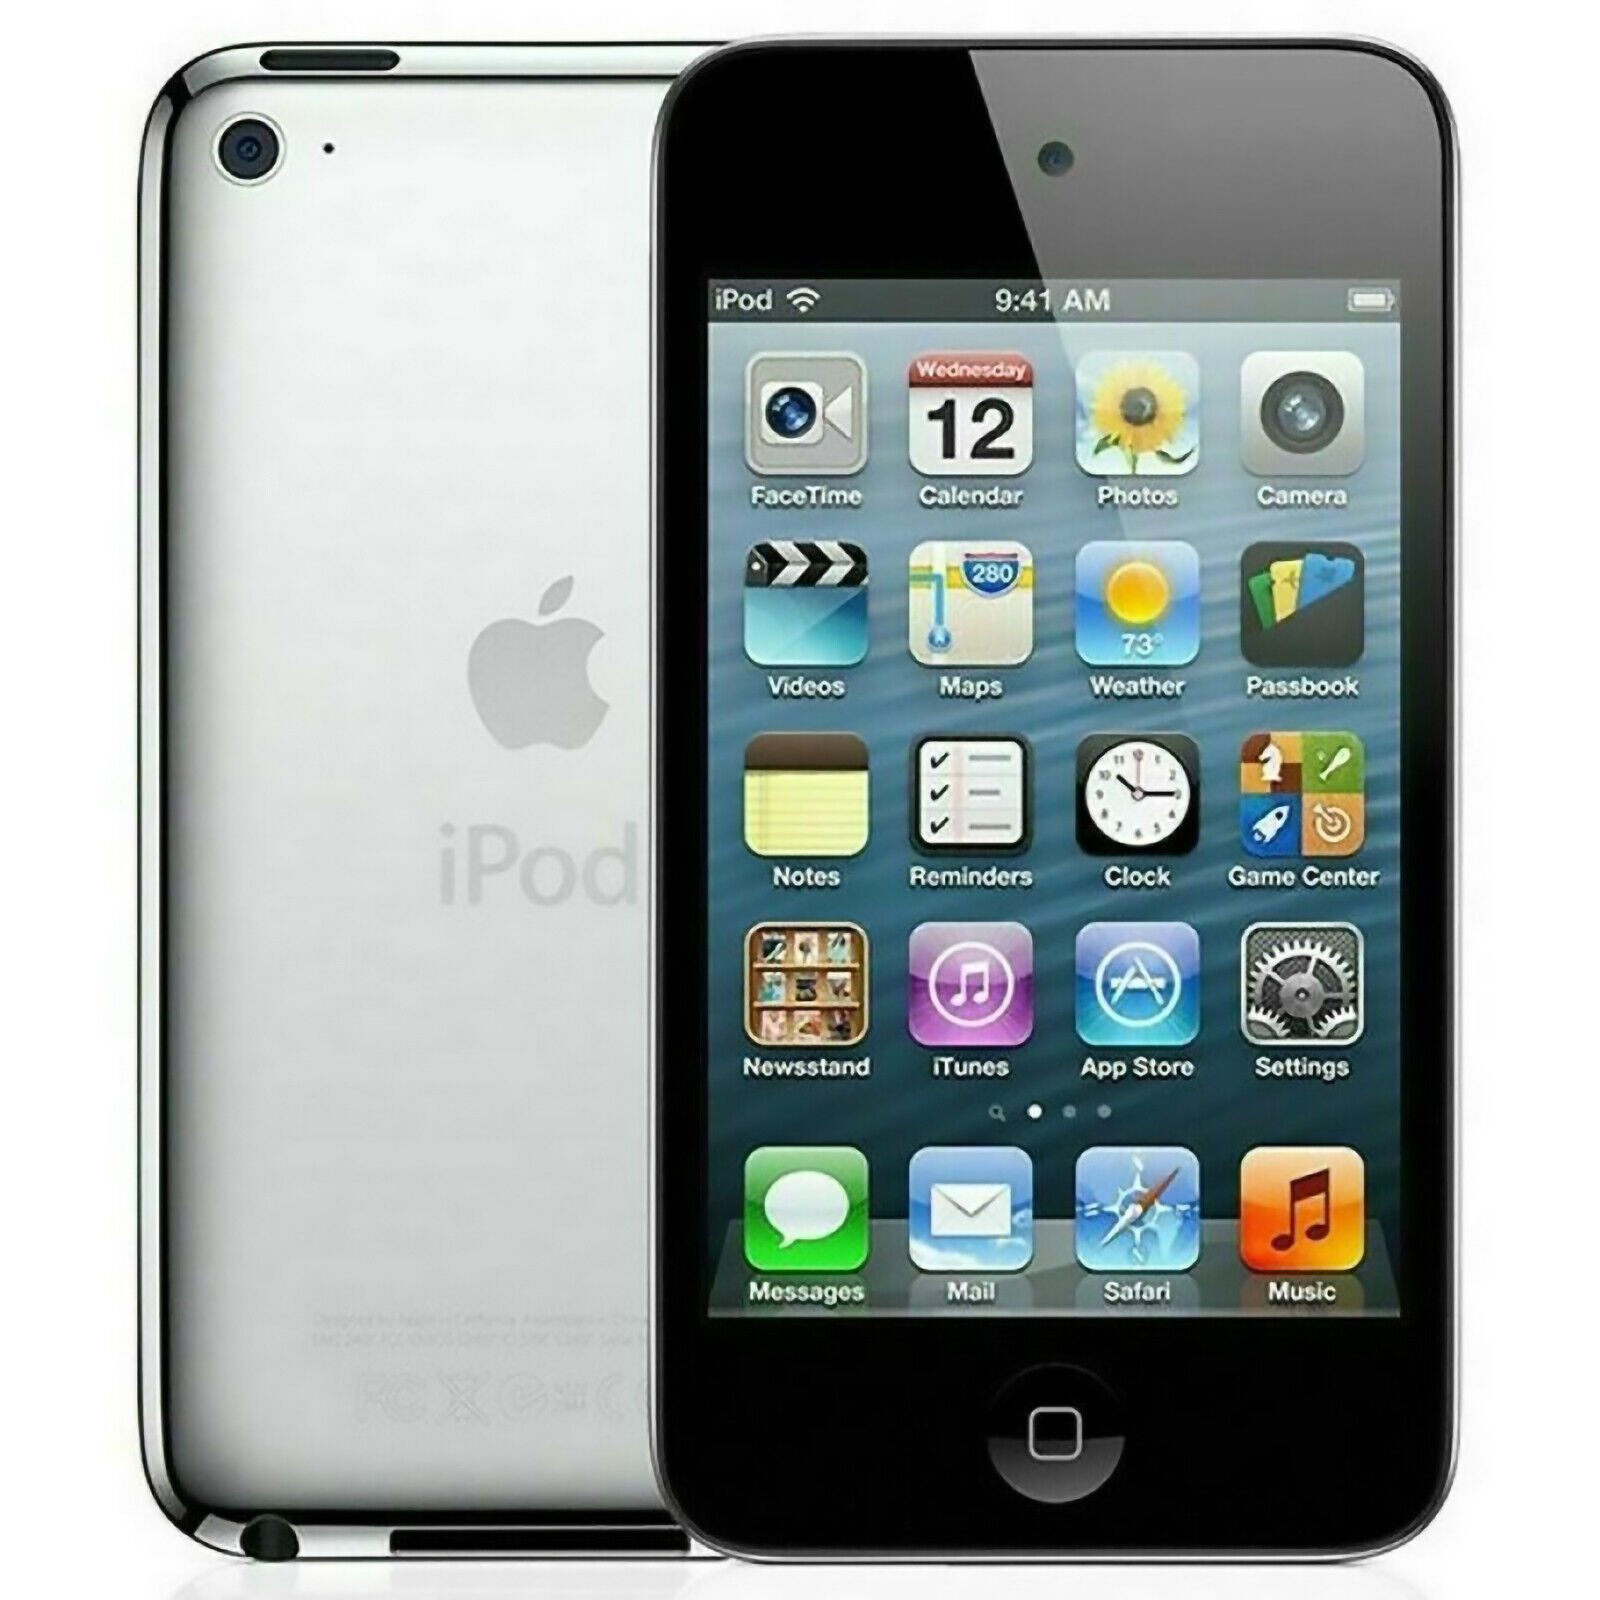 Apple iPod touch 4th Generation Black (64 GB) for sale online | eBay